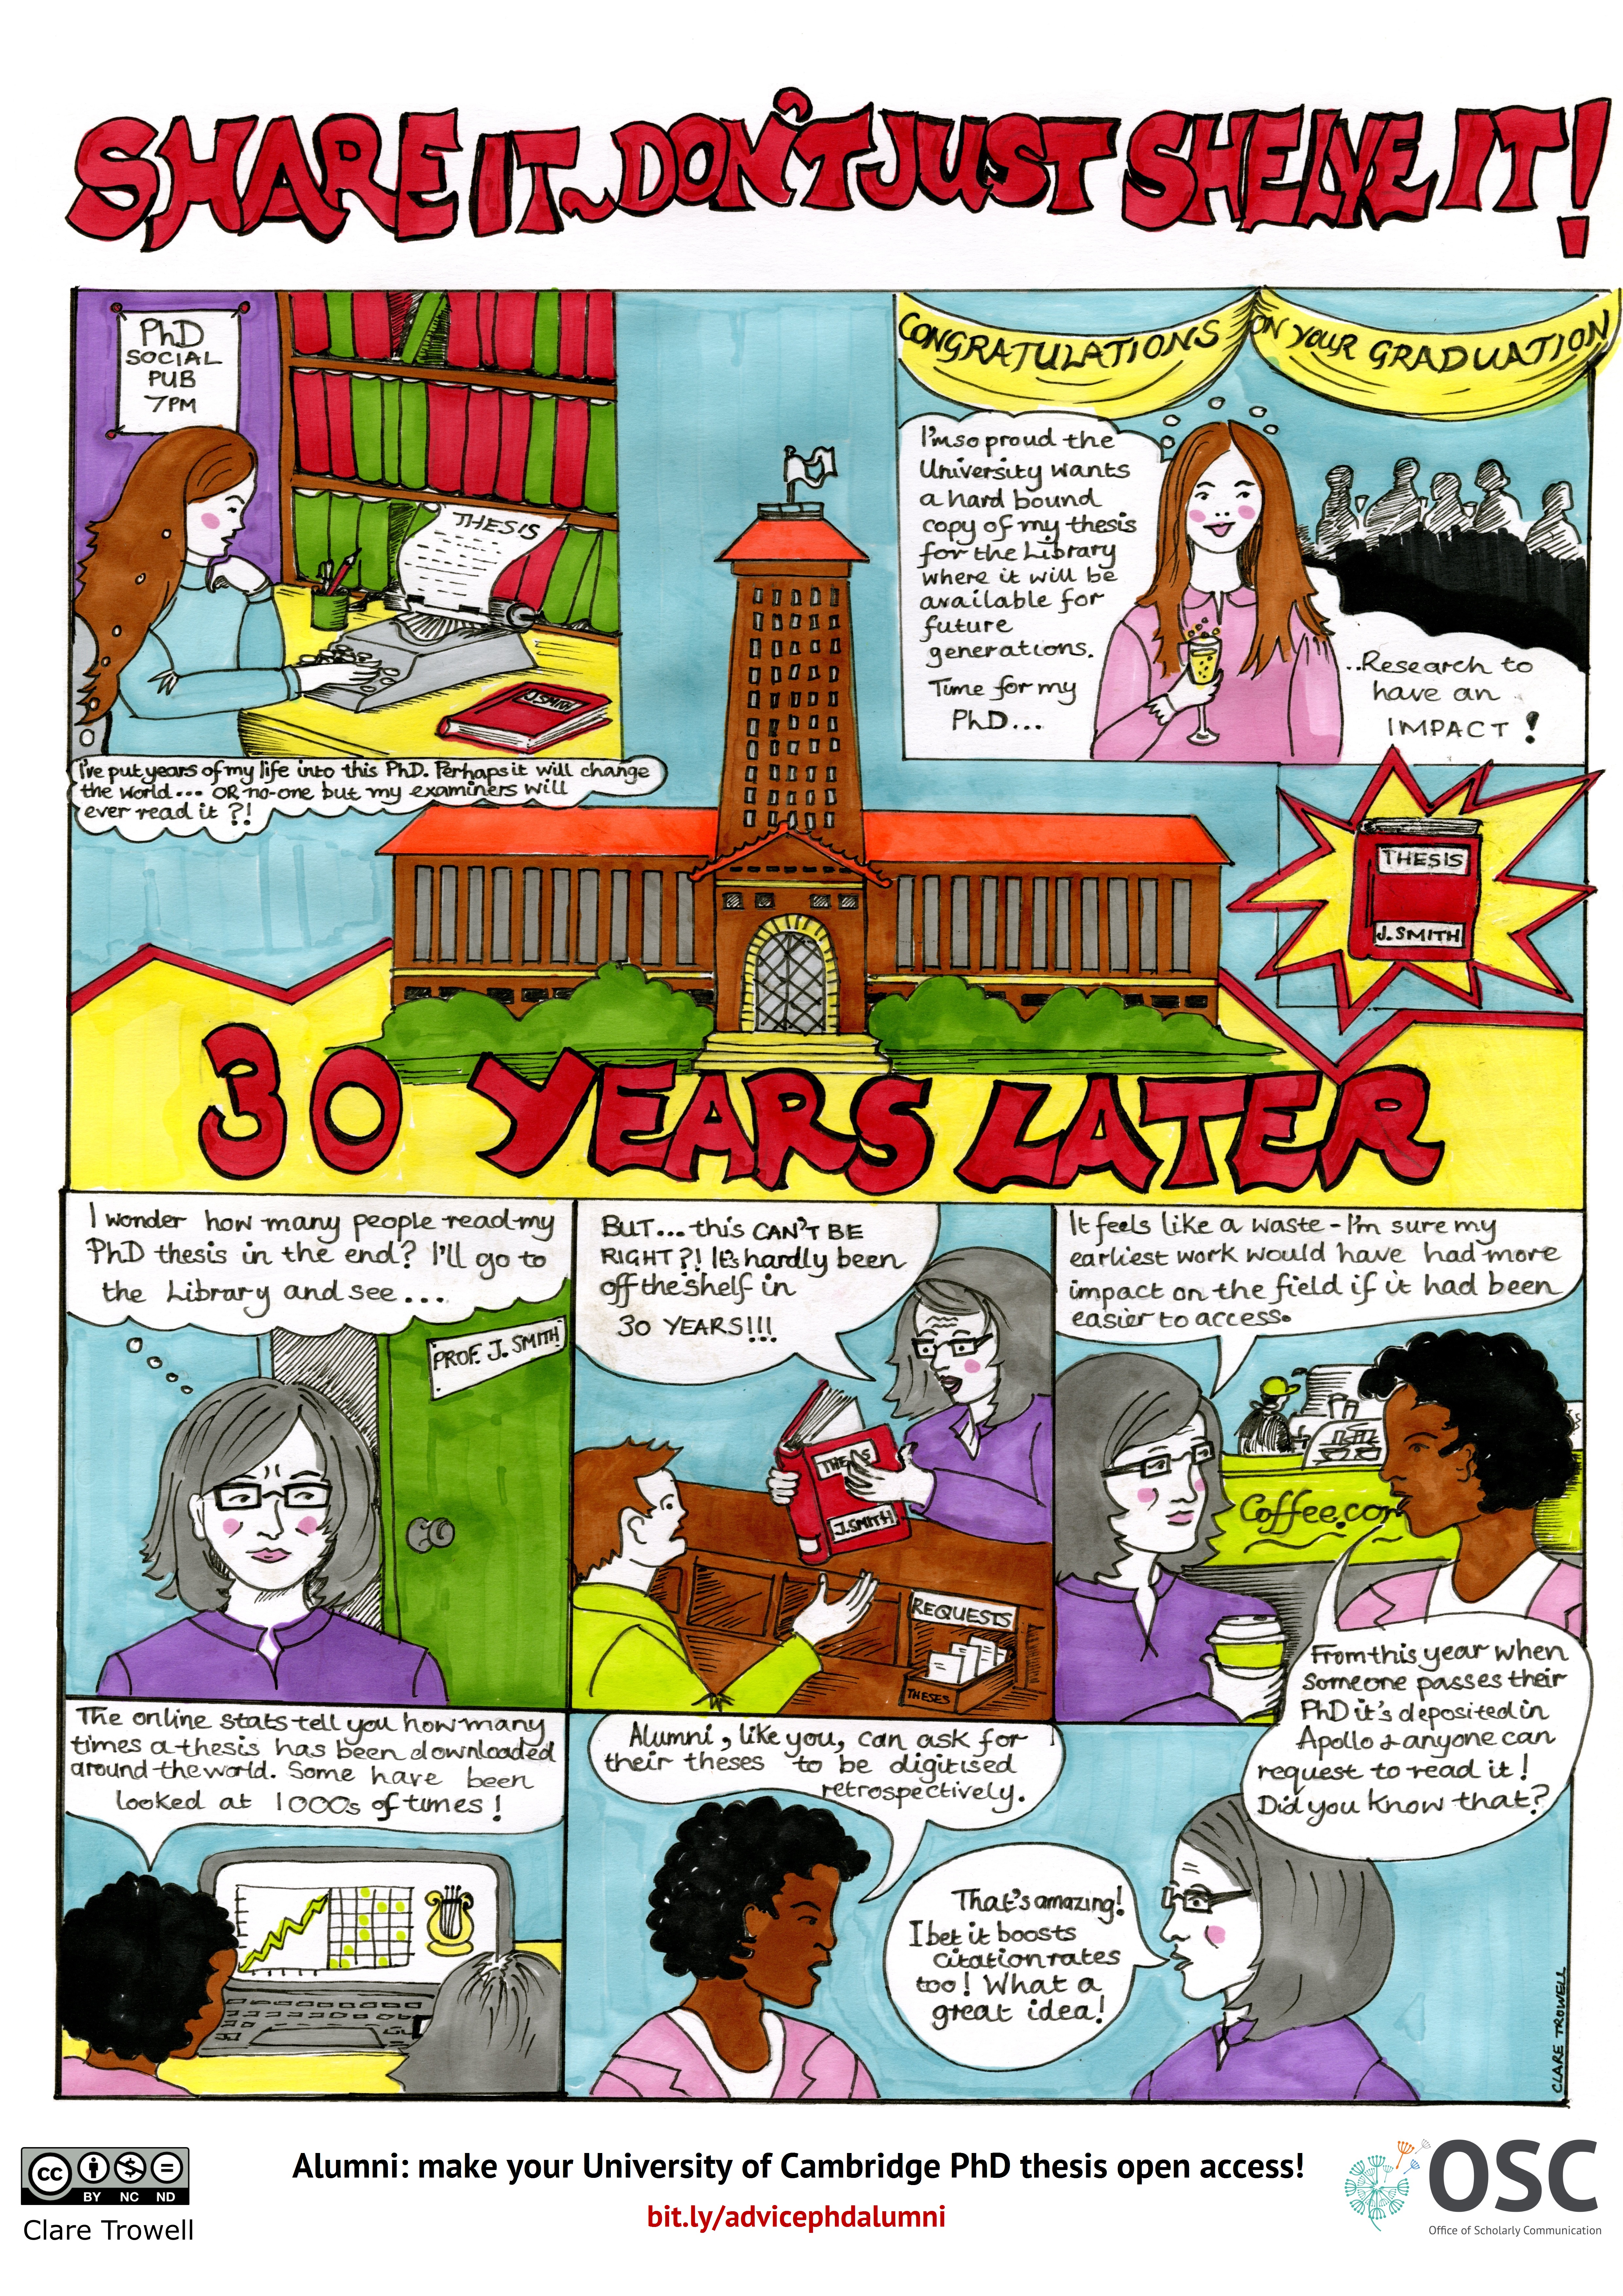 Comic strip 'Share it don't shelve it!' showing the advantages of making a PhD thesis open access